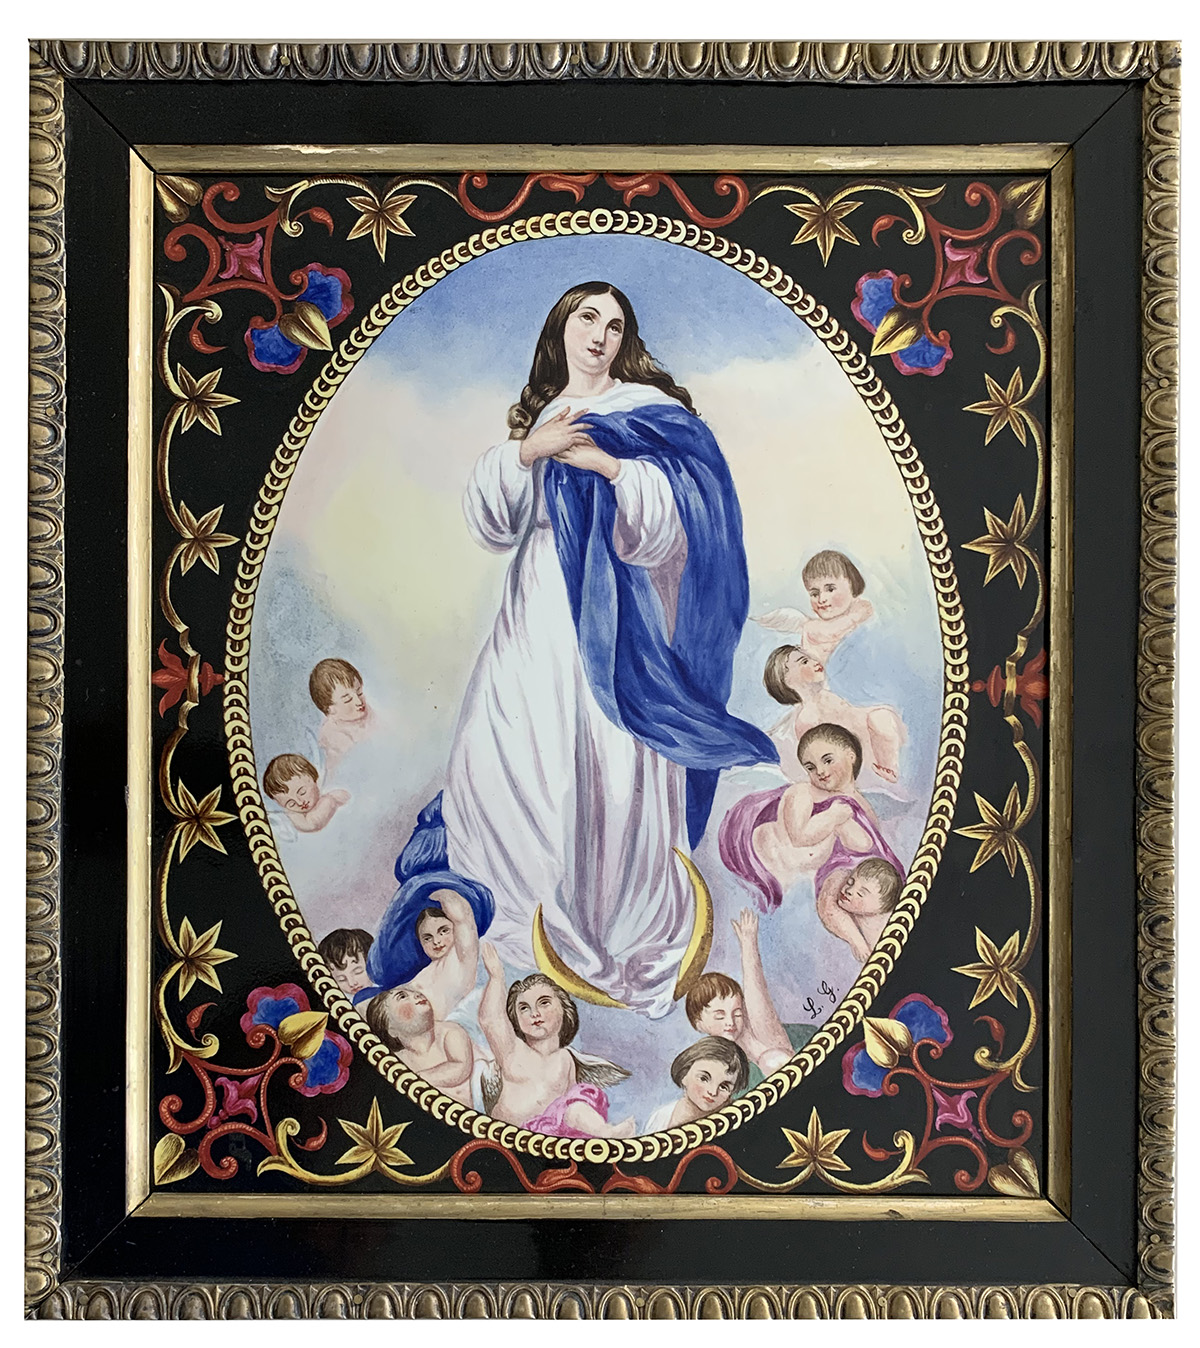 SIGNED RELIGIOUS PAINTING ON PORCELAIN: